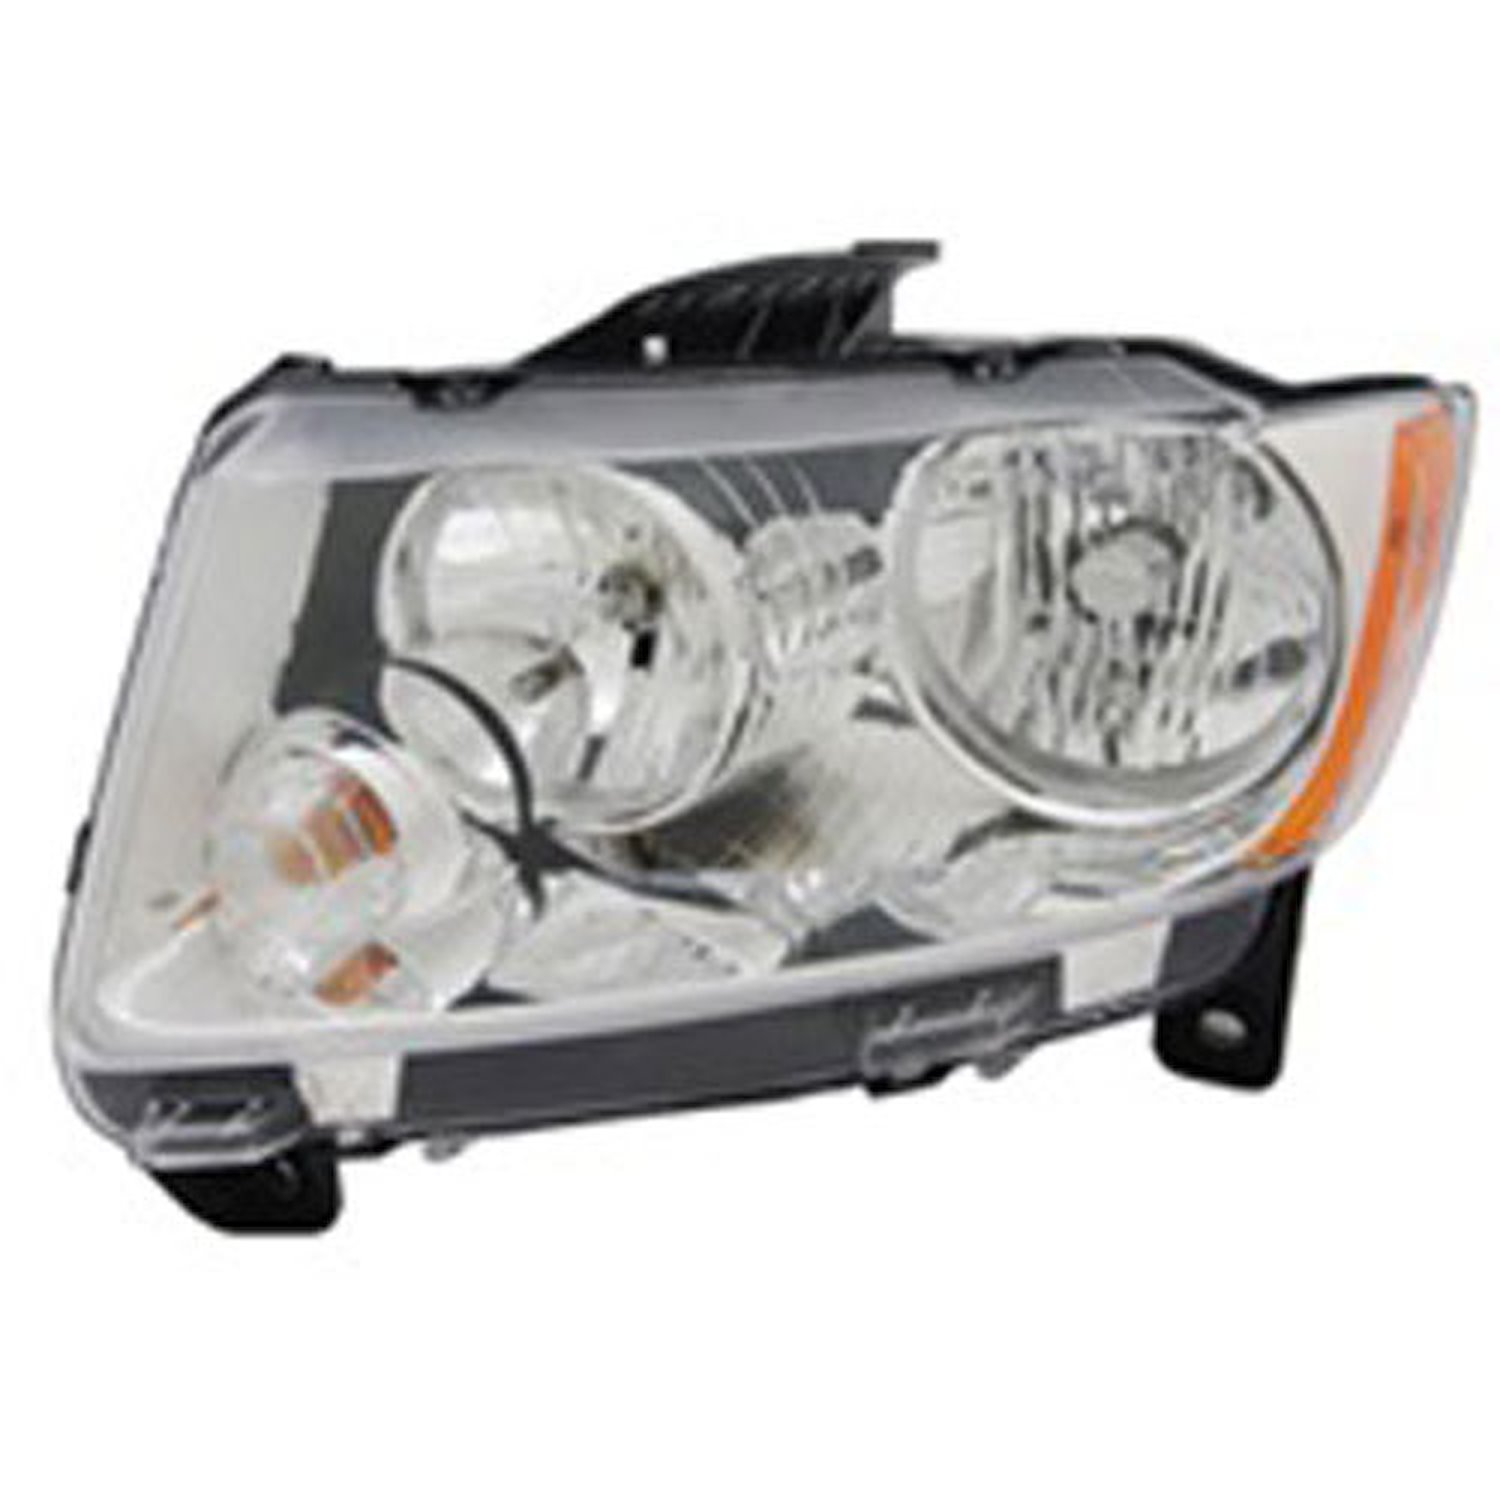 Replacement headlight assembly from Omix-ADA, Fits left side of11-13 Jeep Grand Cherokee